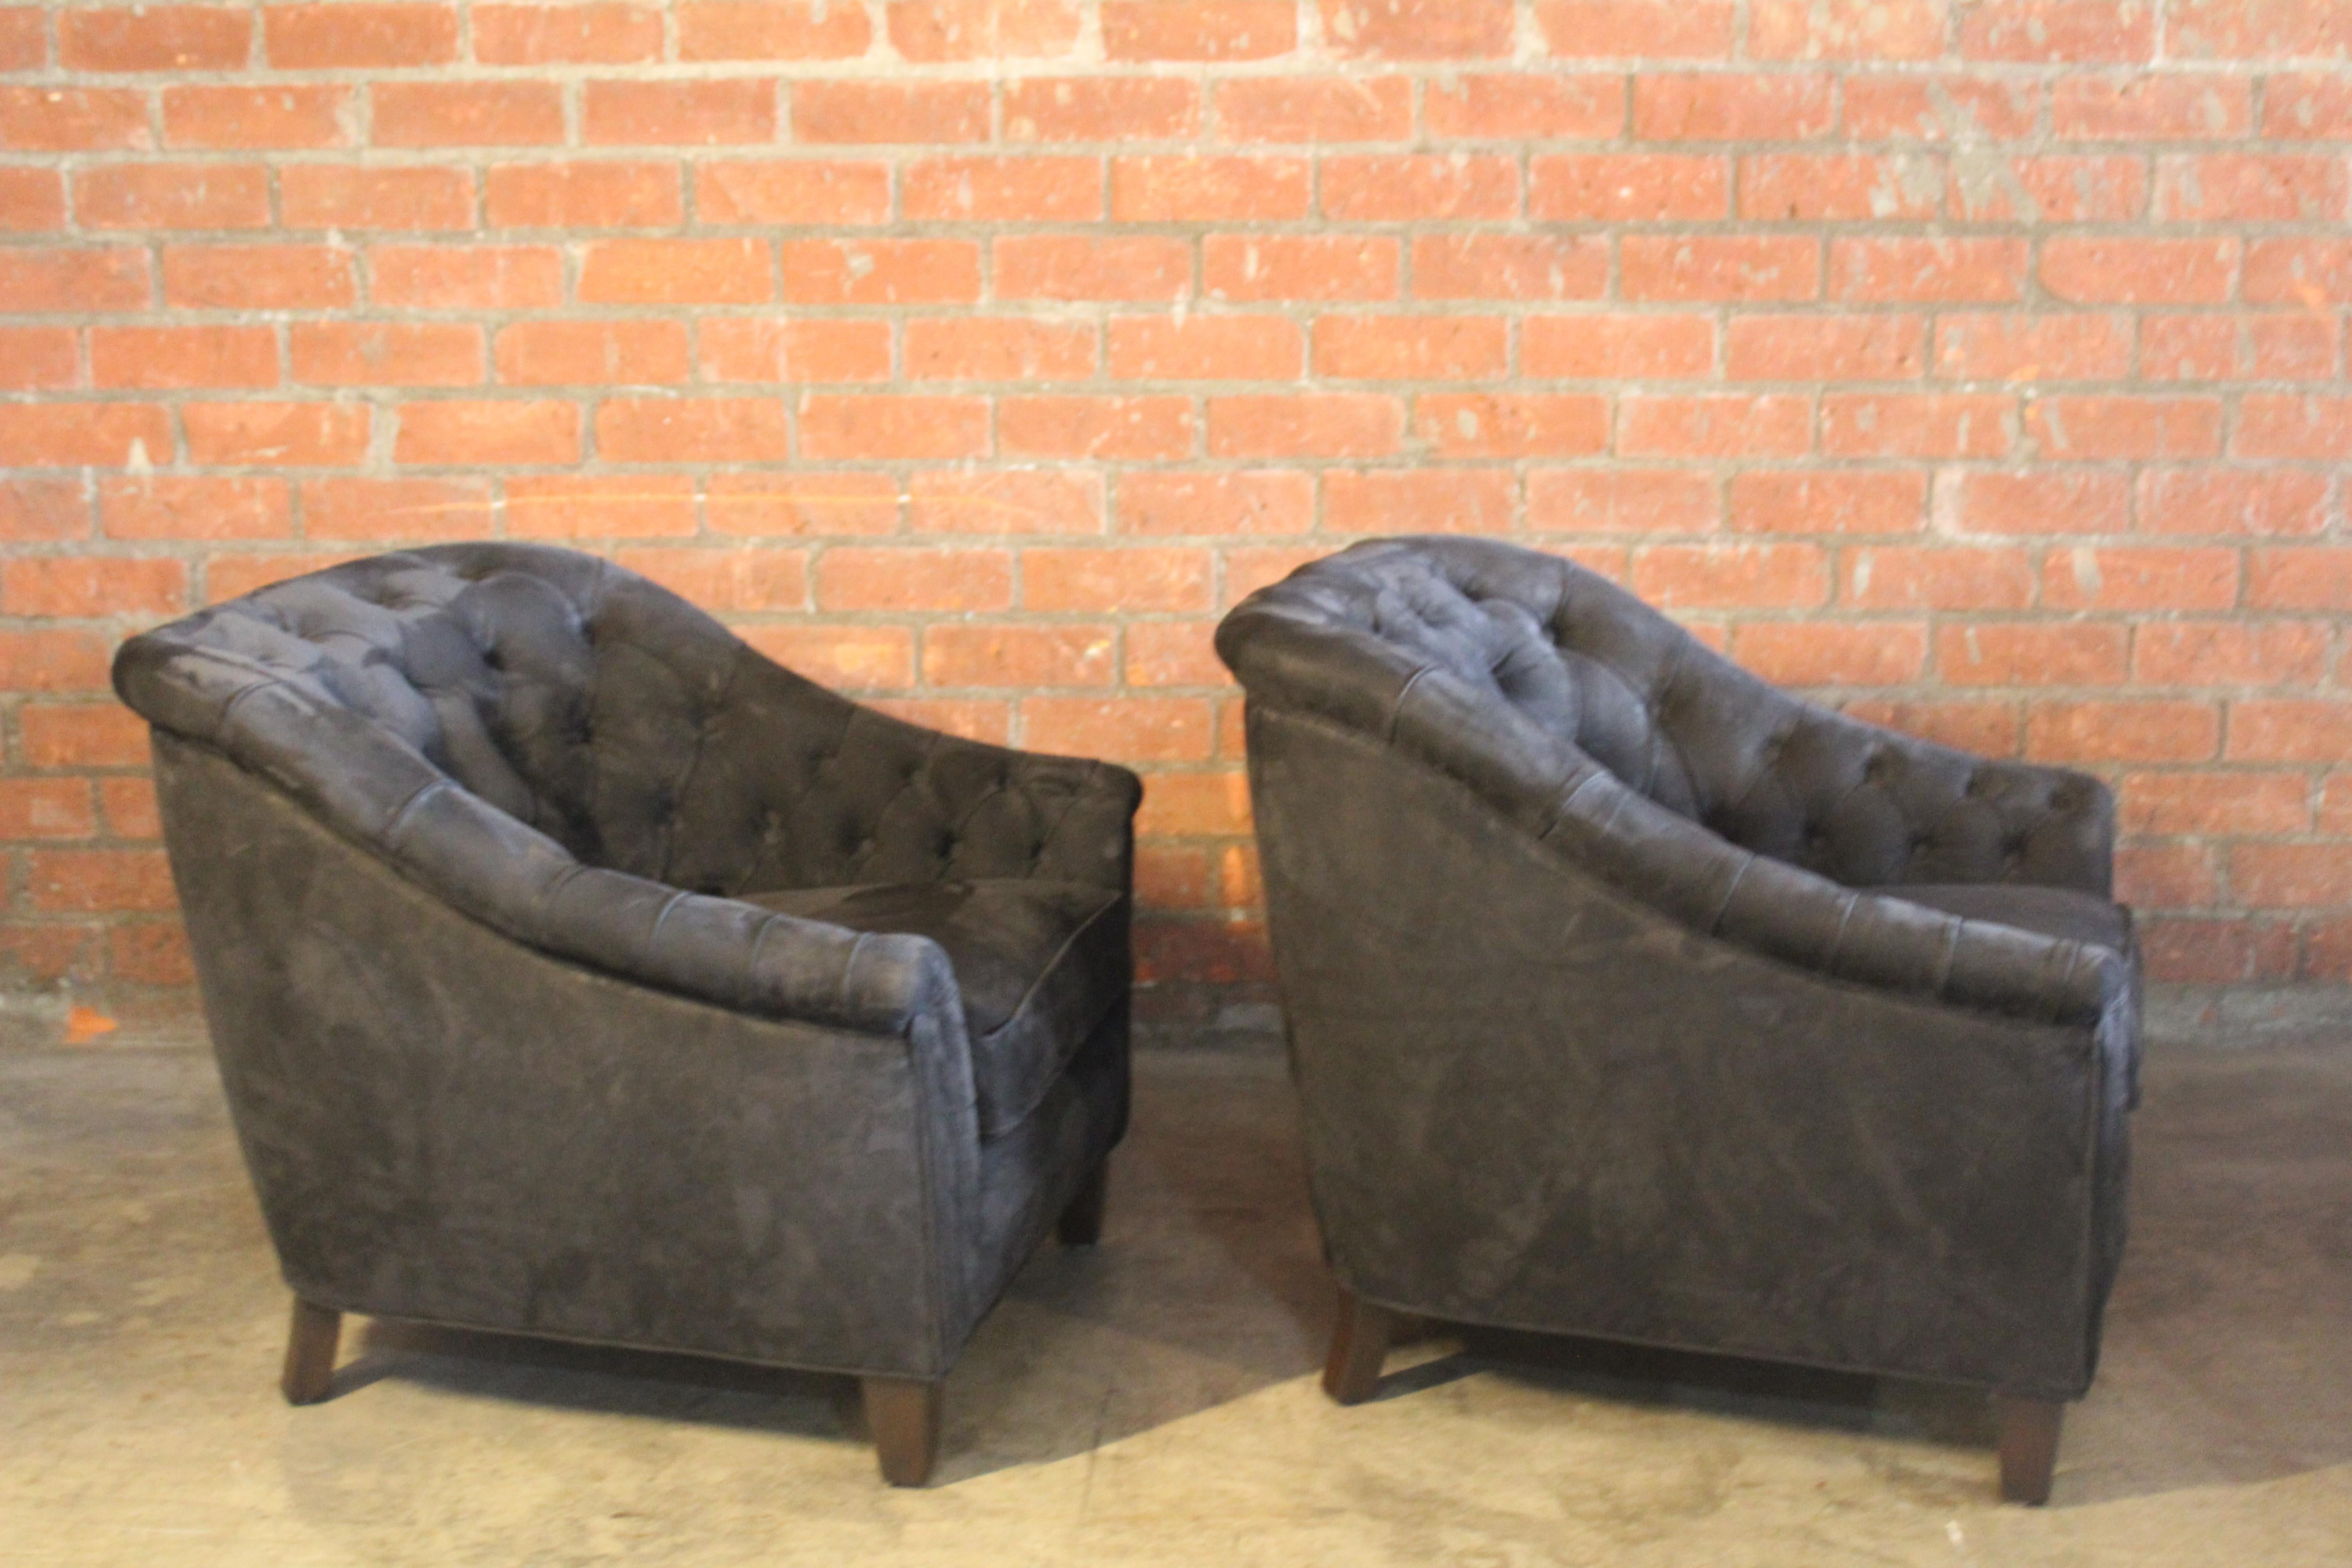 Pair of Tufted Leather Club Chairs, France, 1960s For Sale 5